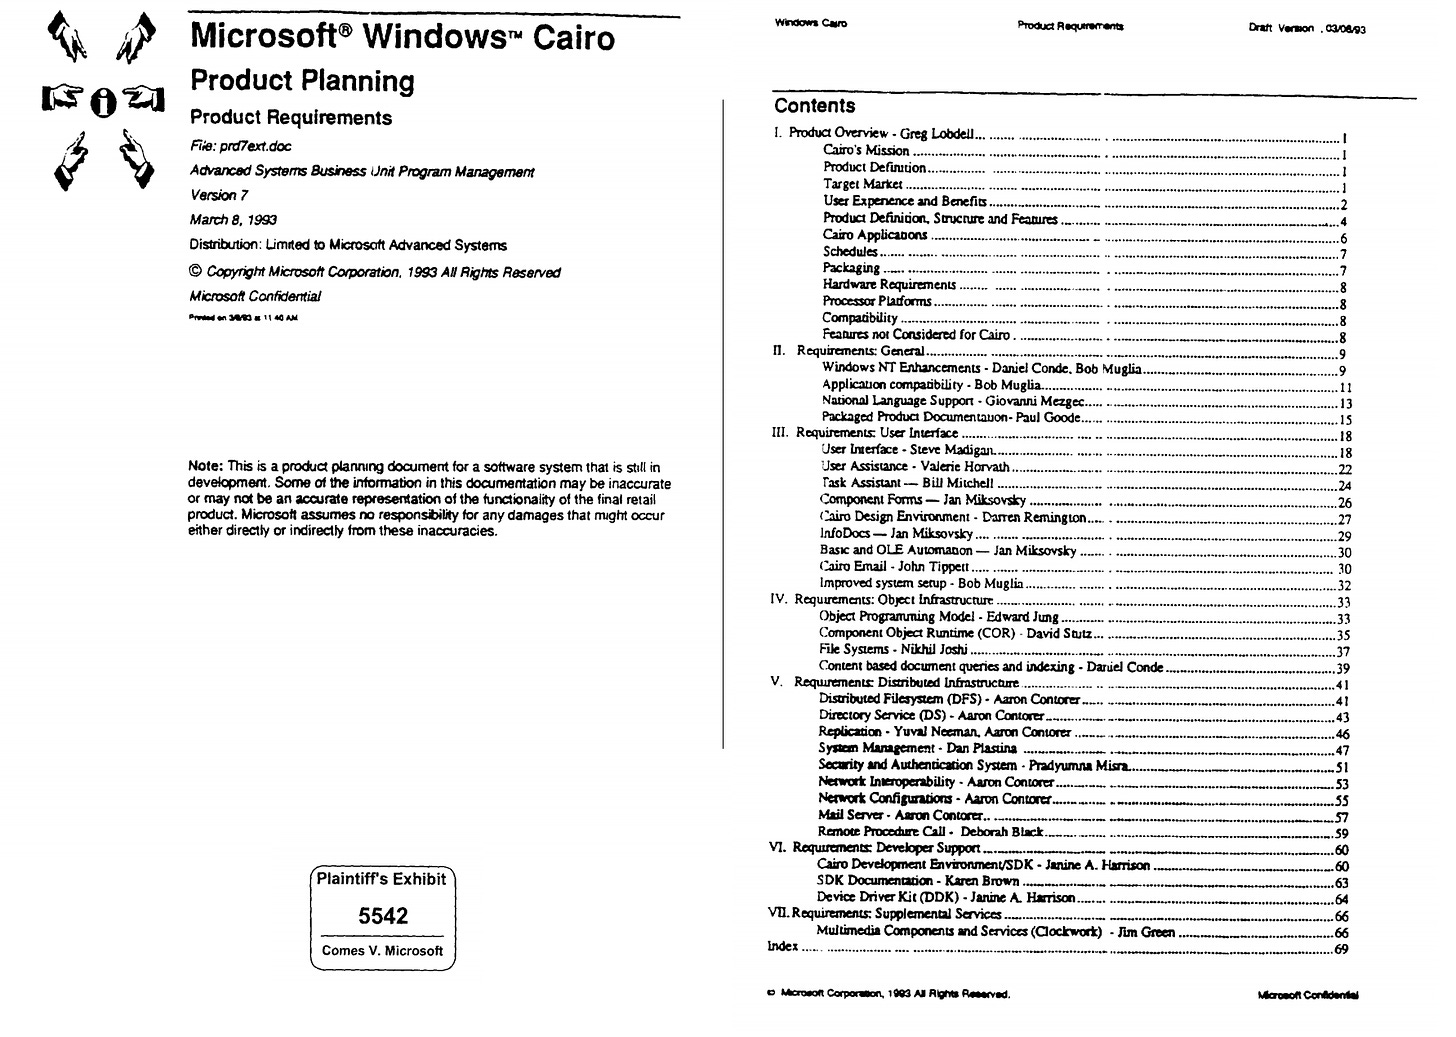 Microsoft Windows Cairo Product Planning: Product Requirements cover and table of contents from March 8, 1993